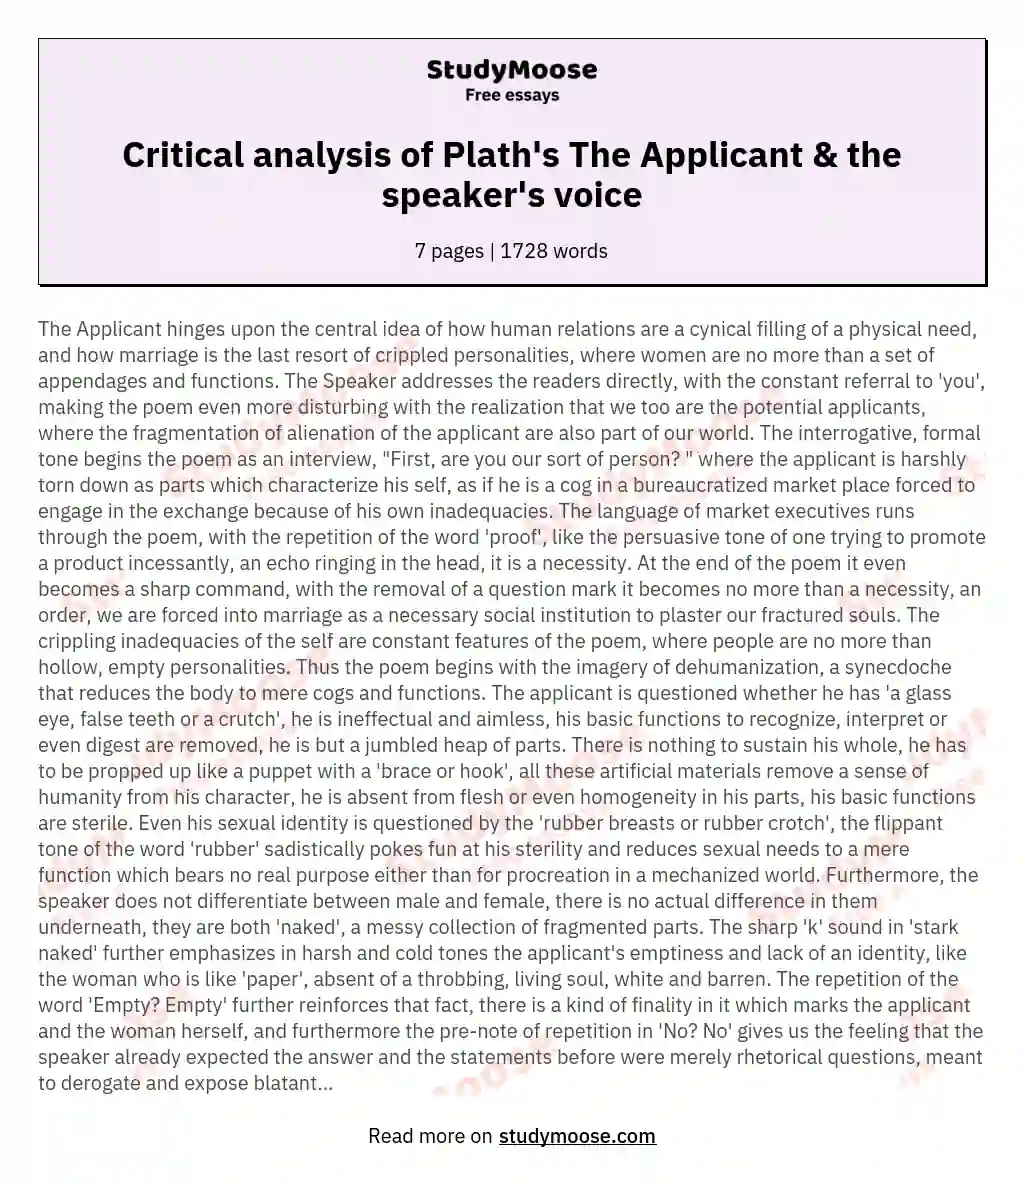 Critical analysis of Plath's The Applicant & the speaker's voice essay